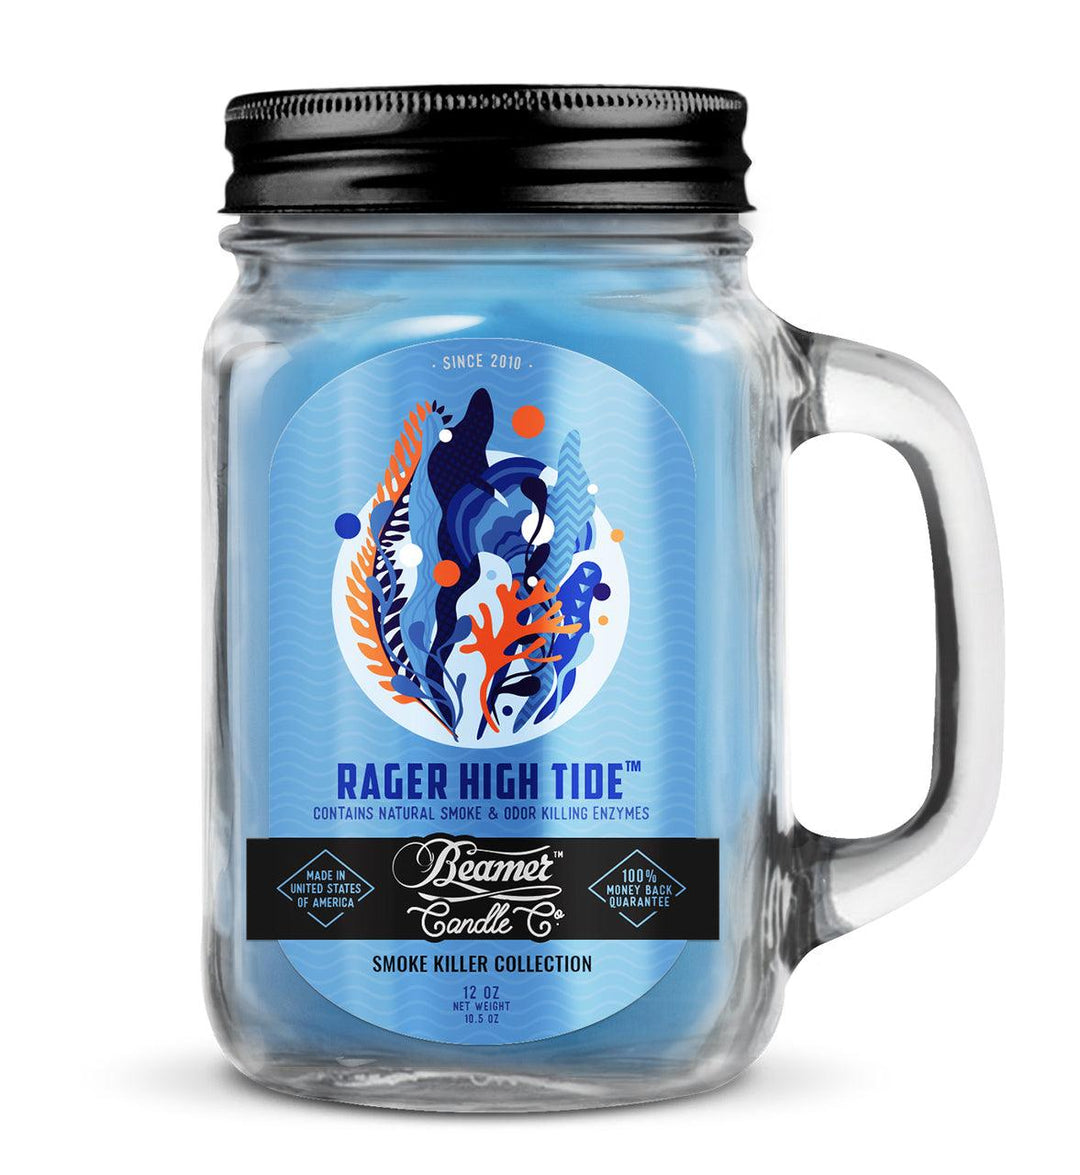 Beamer Candle Smoke Killer Collection - Rager High Tide - Quecan